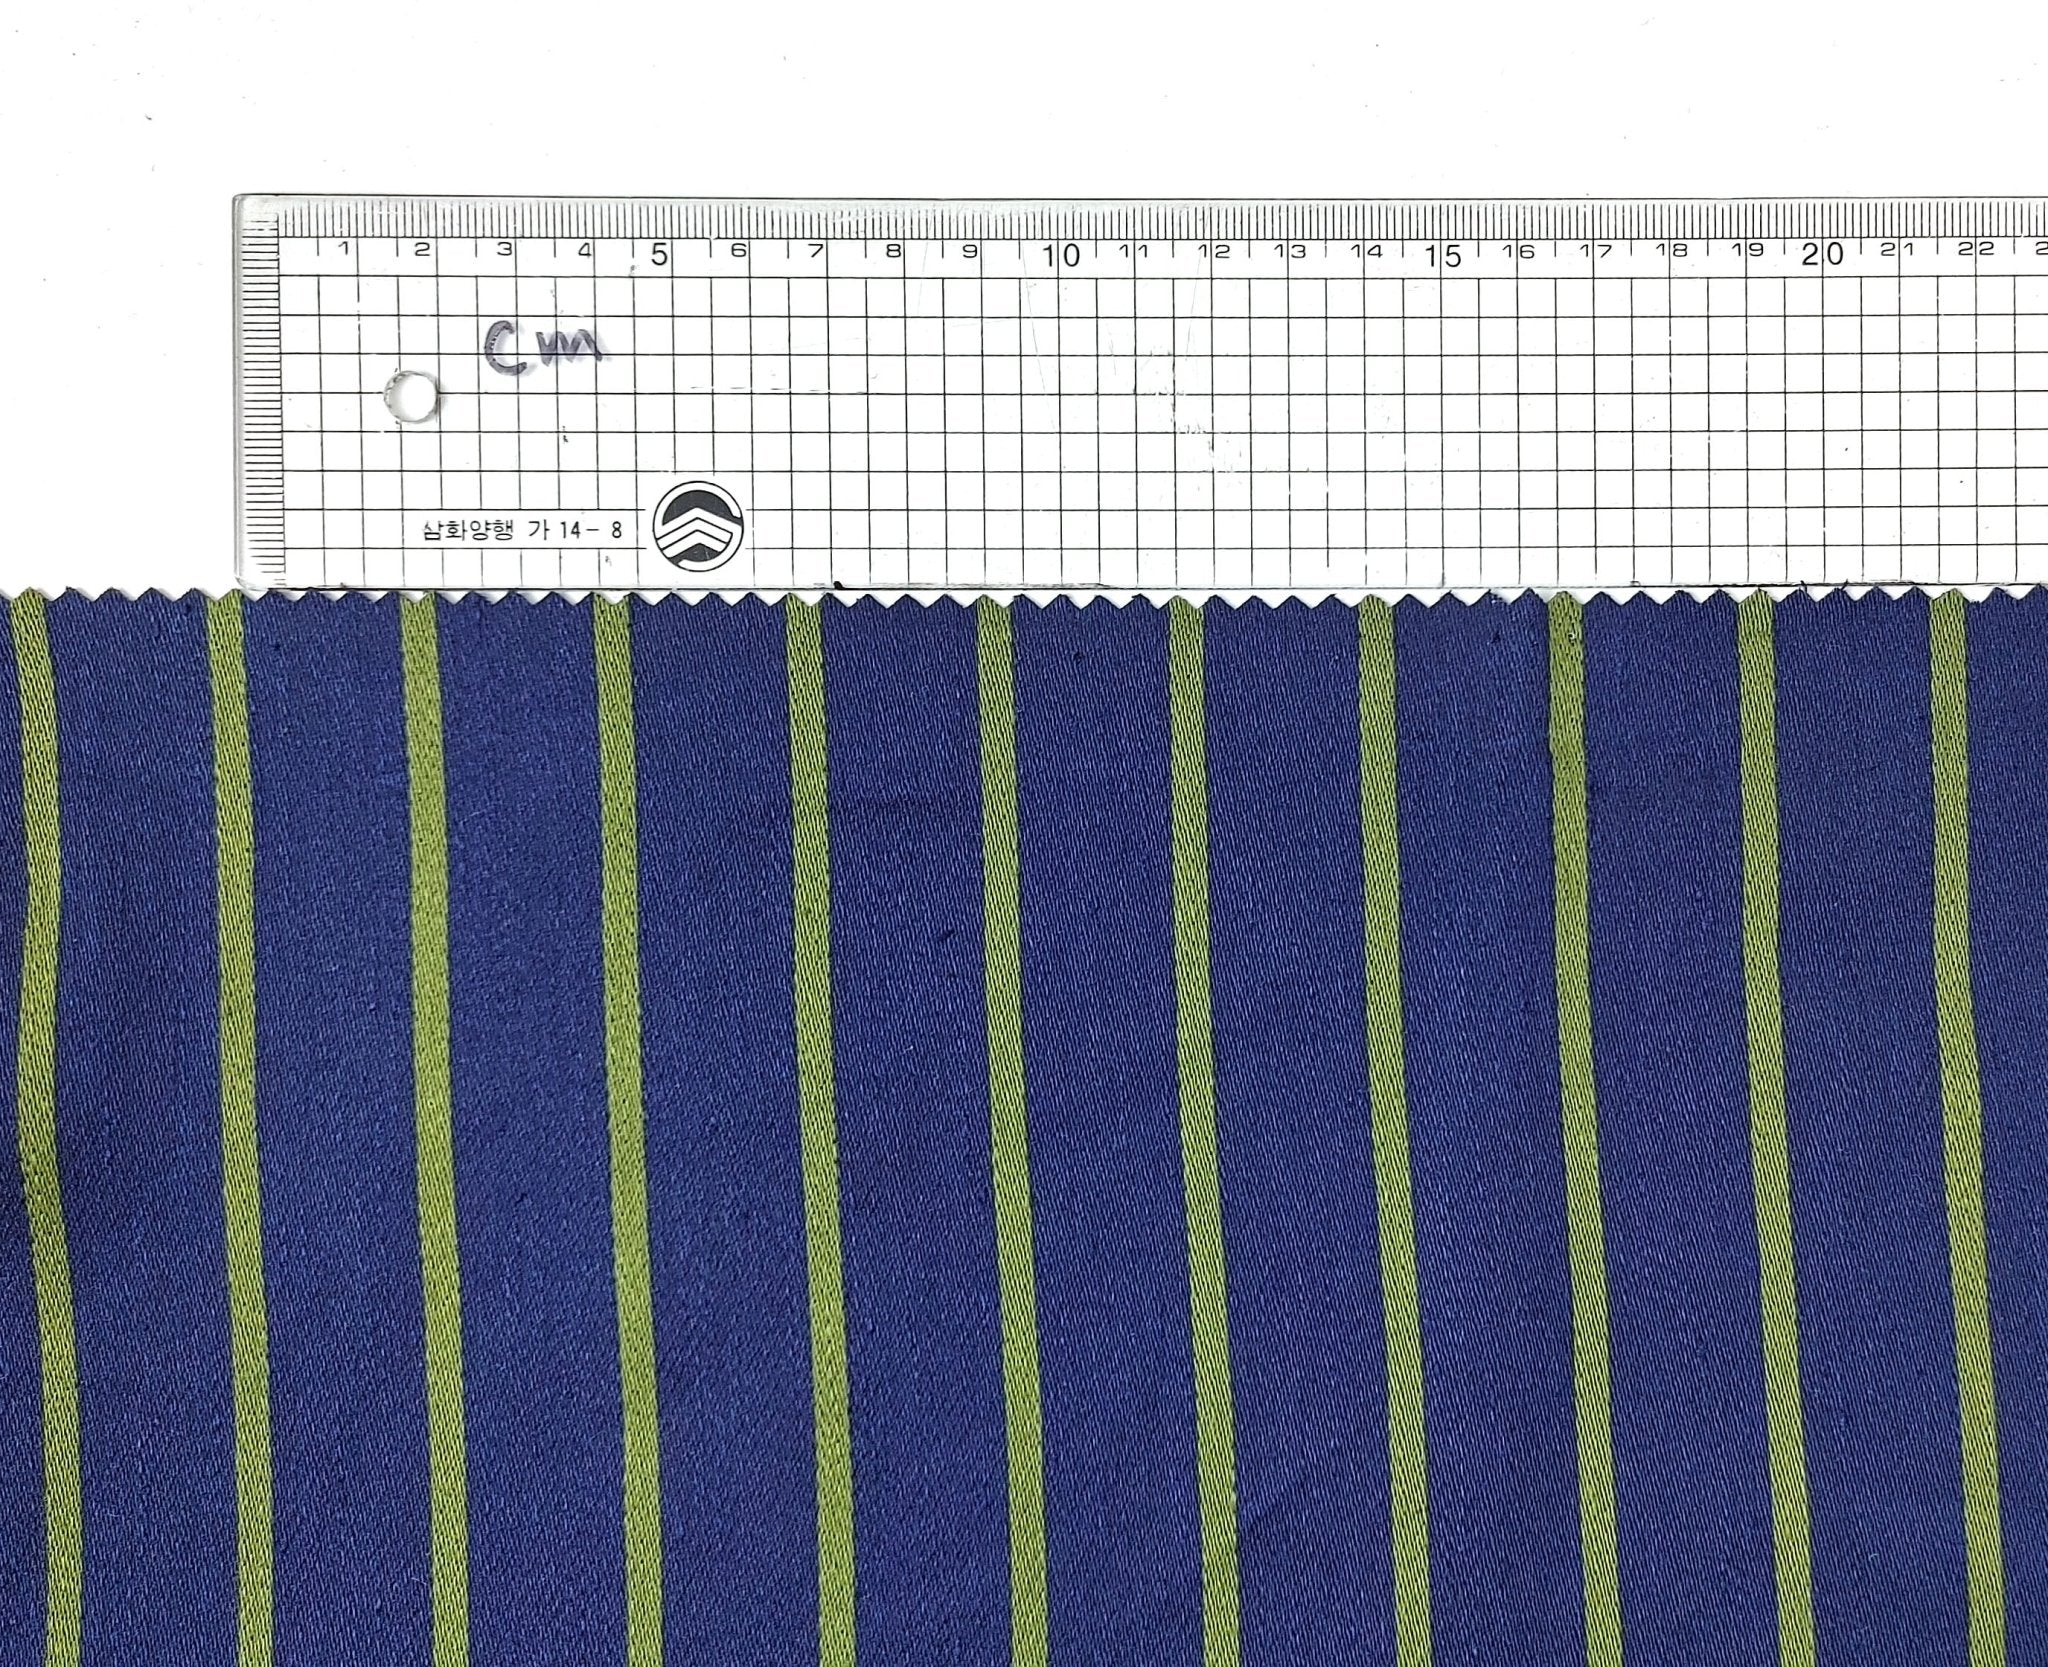 Linen Polyester Stretch Fabric with Satin Weave Stripe Pattern 6038 - The Linen Lab - Navy